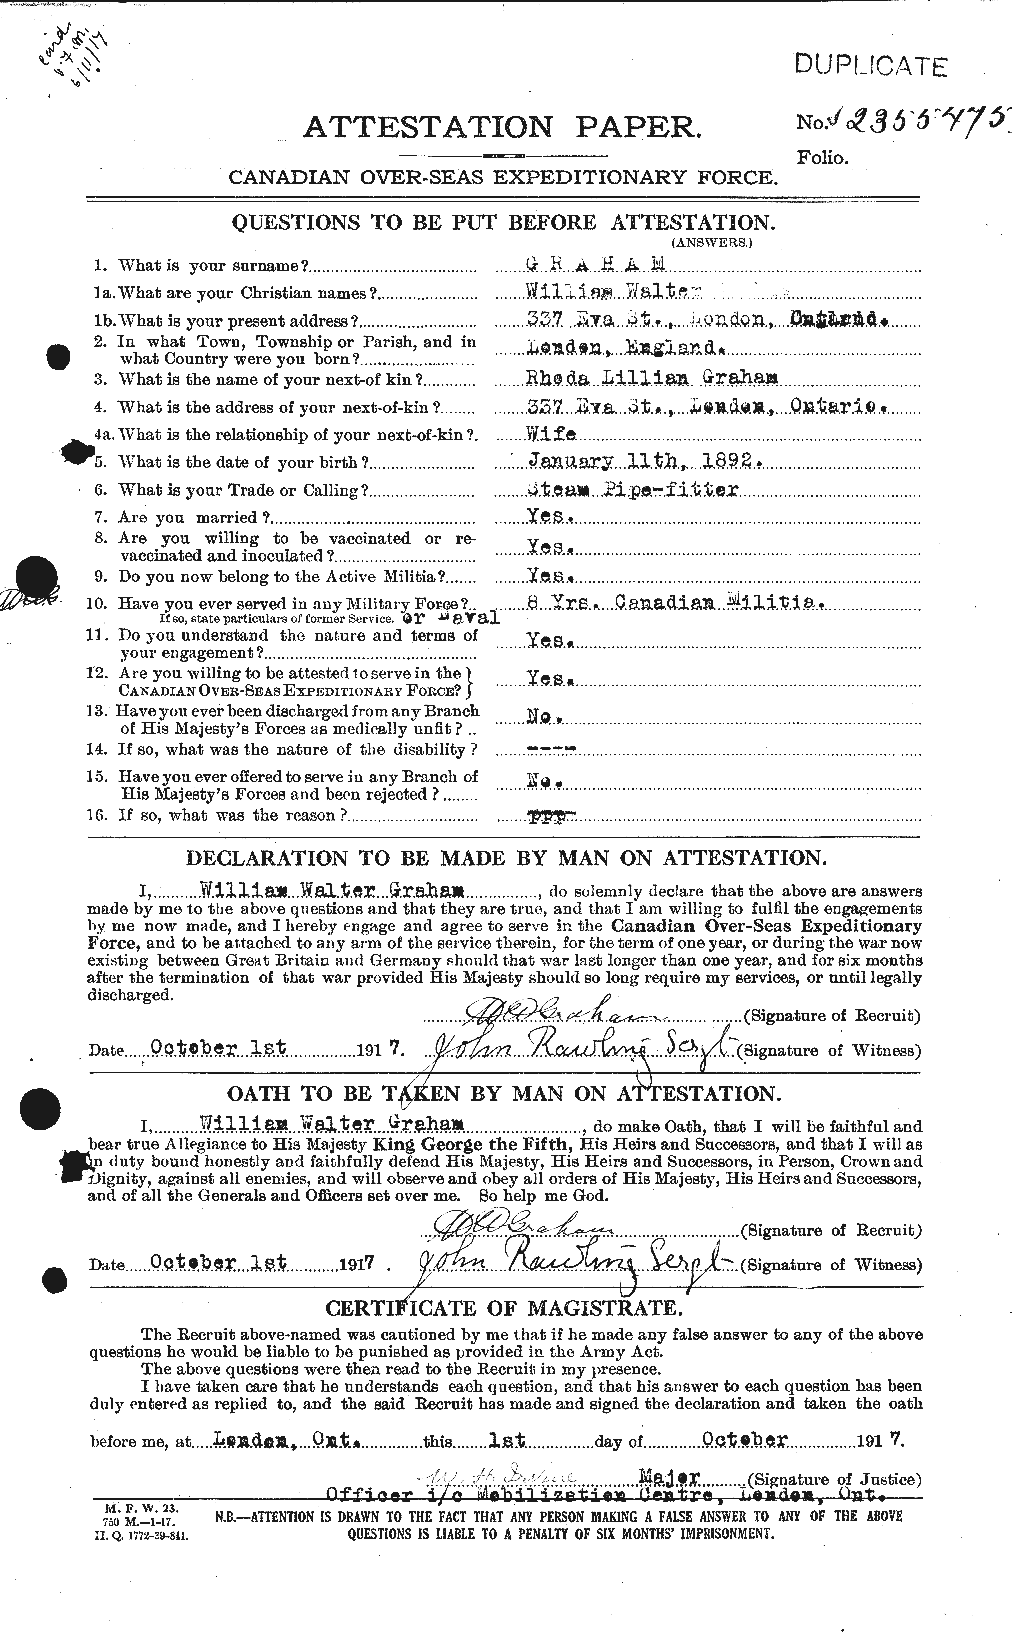 Personnel Records of the First World War - CEF 358047a